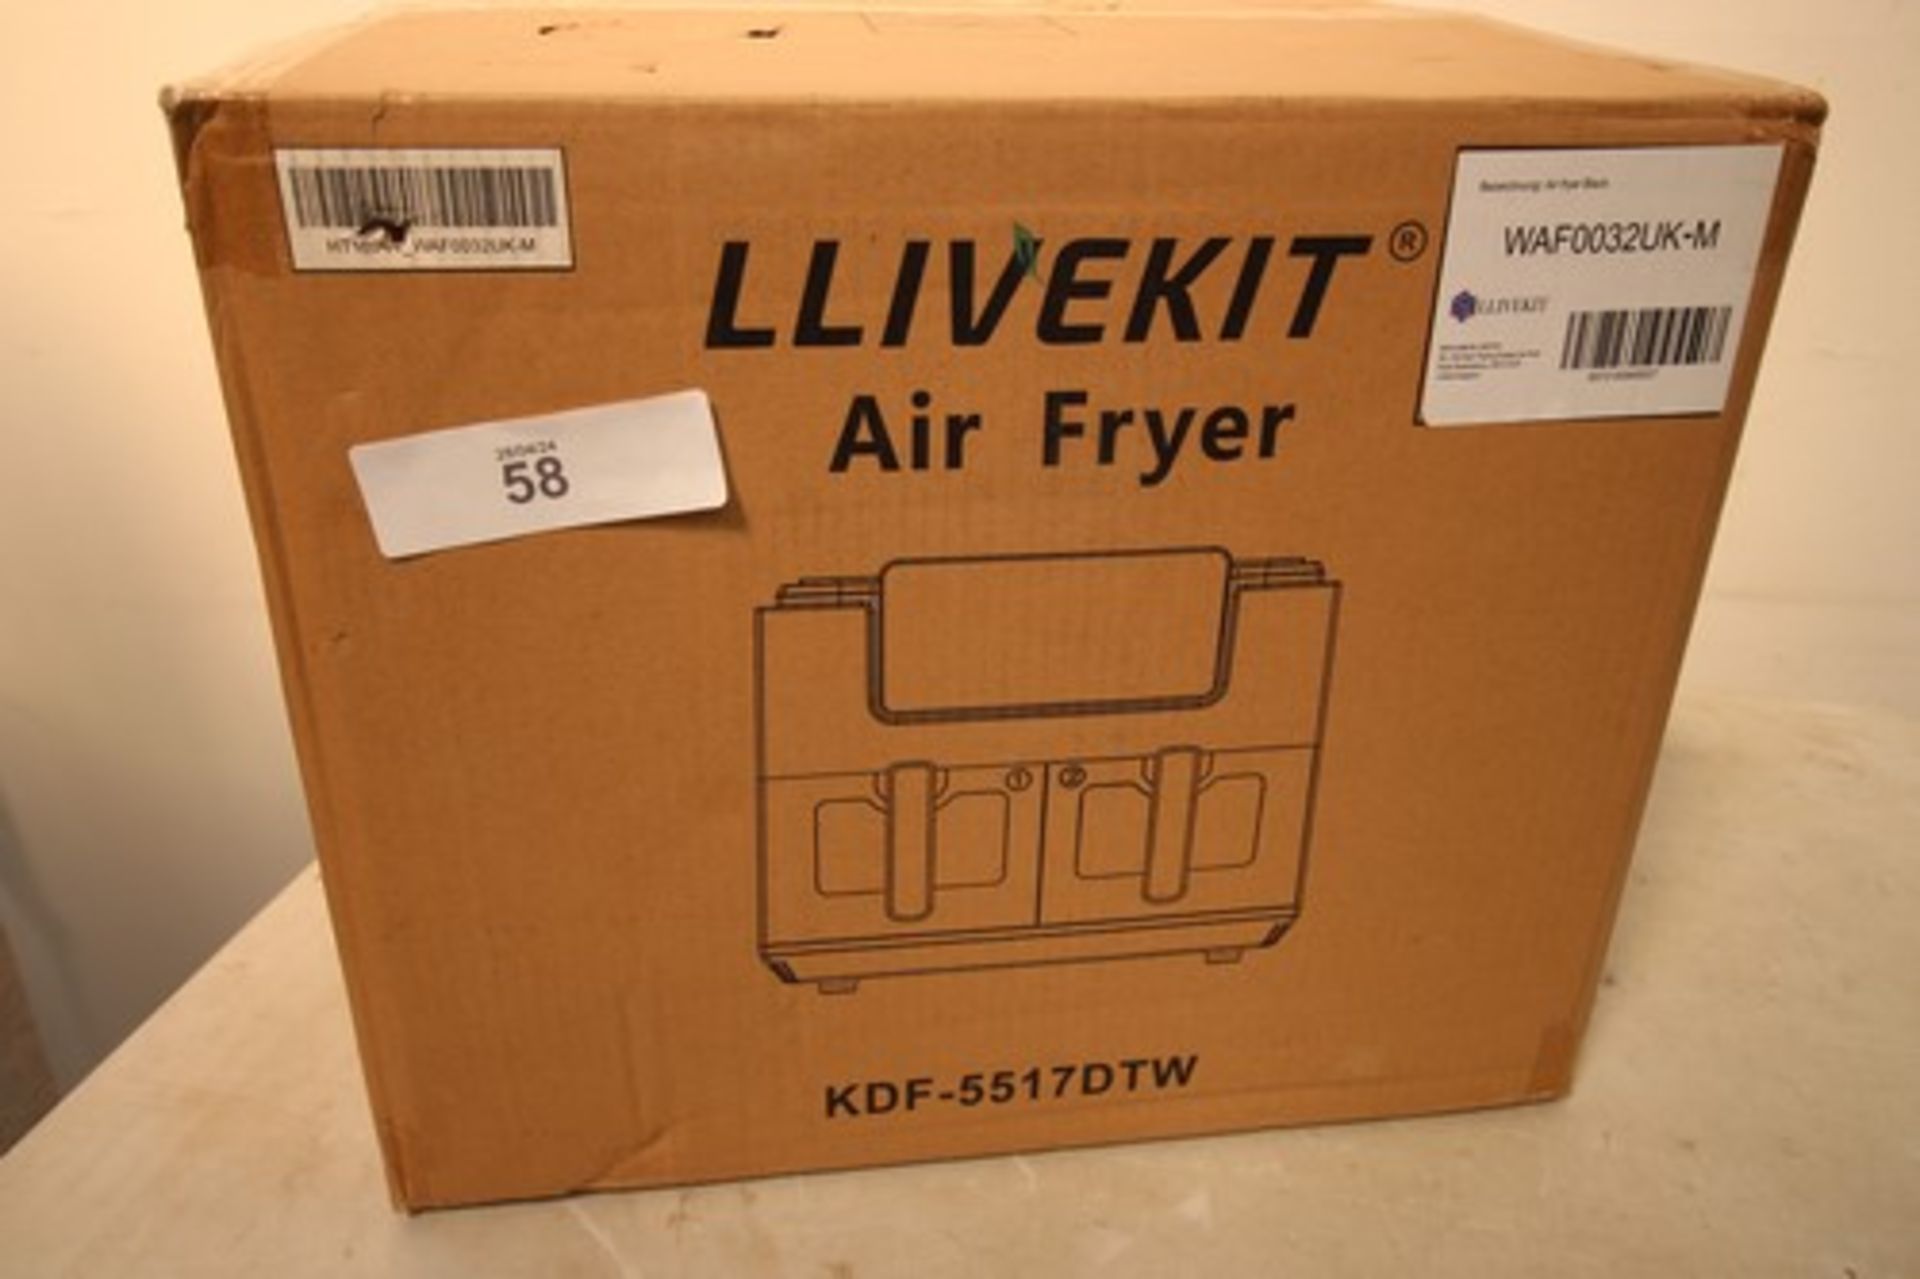 1 x Llivekit double air fryer, model No: KDF-5517DTW - sealed new in box (ES2) - Image 2 of 2